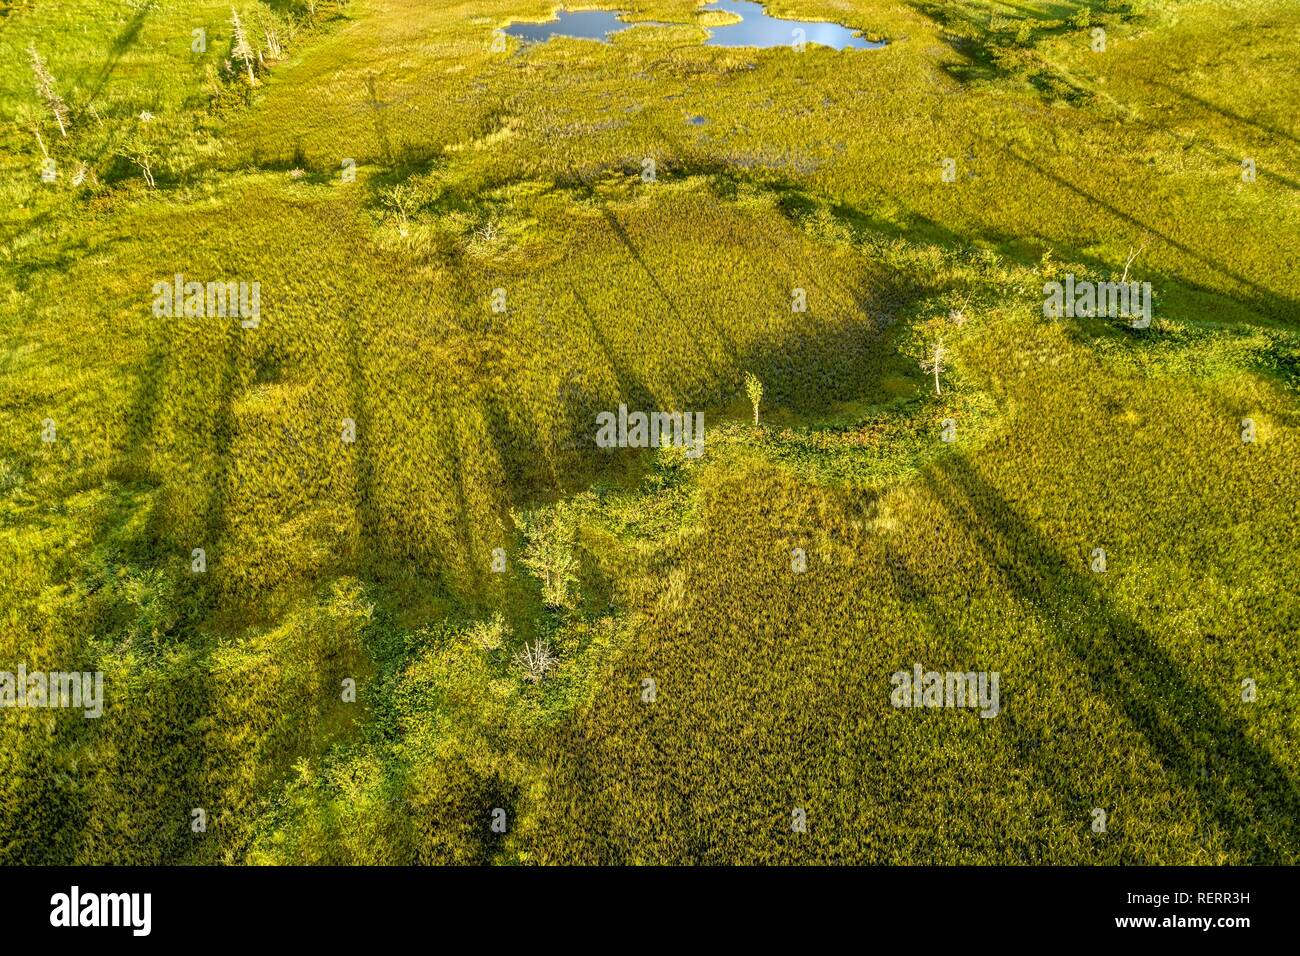 Drone view, aerial photo, wetland, moor with small Pines (Pinus), trees casting long shadows, Sodankylä, Lapland, Finland Stock Photo